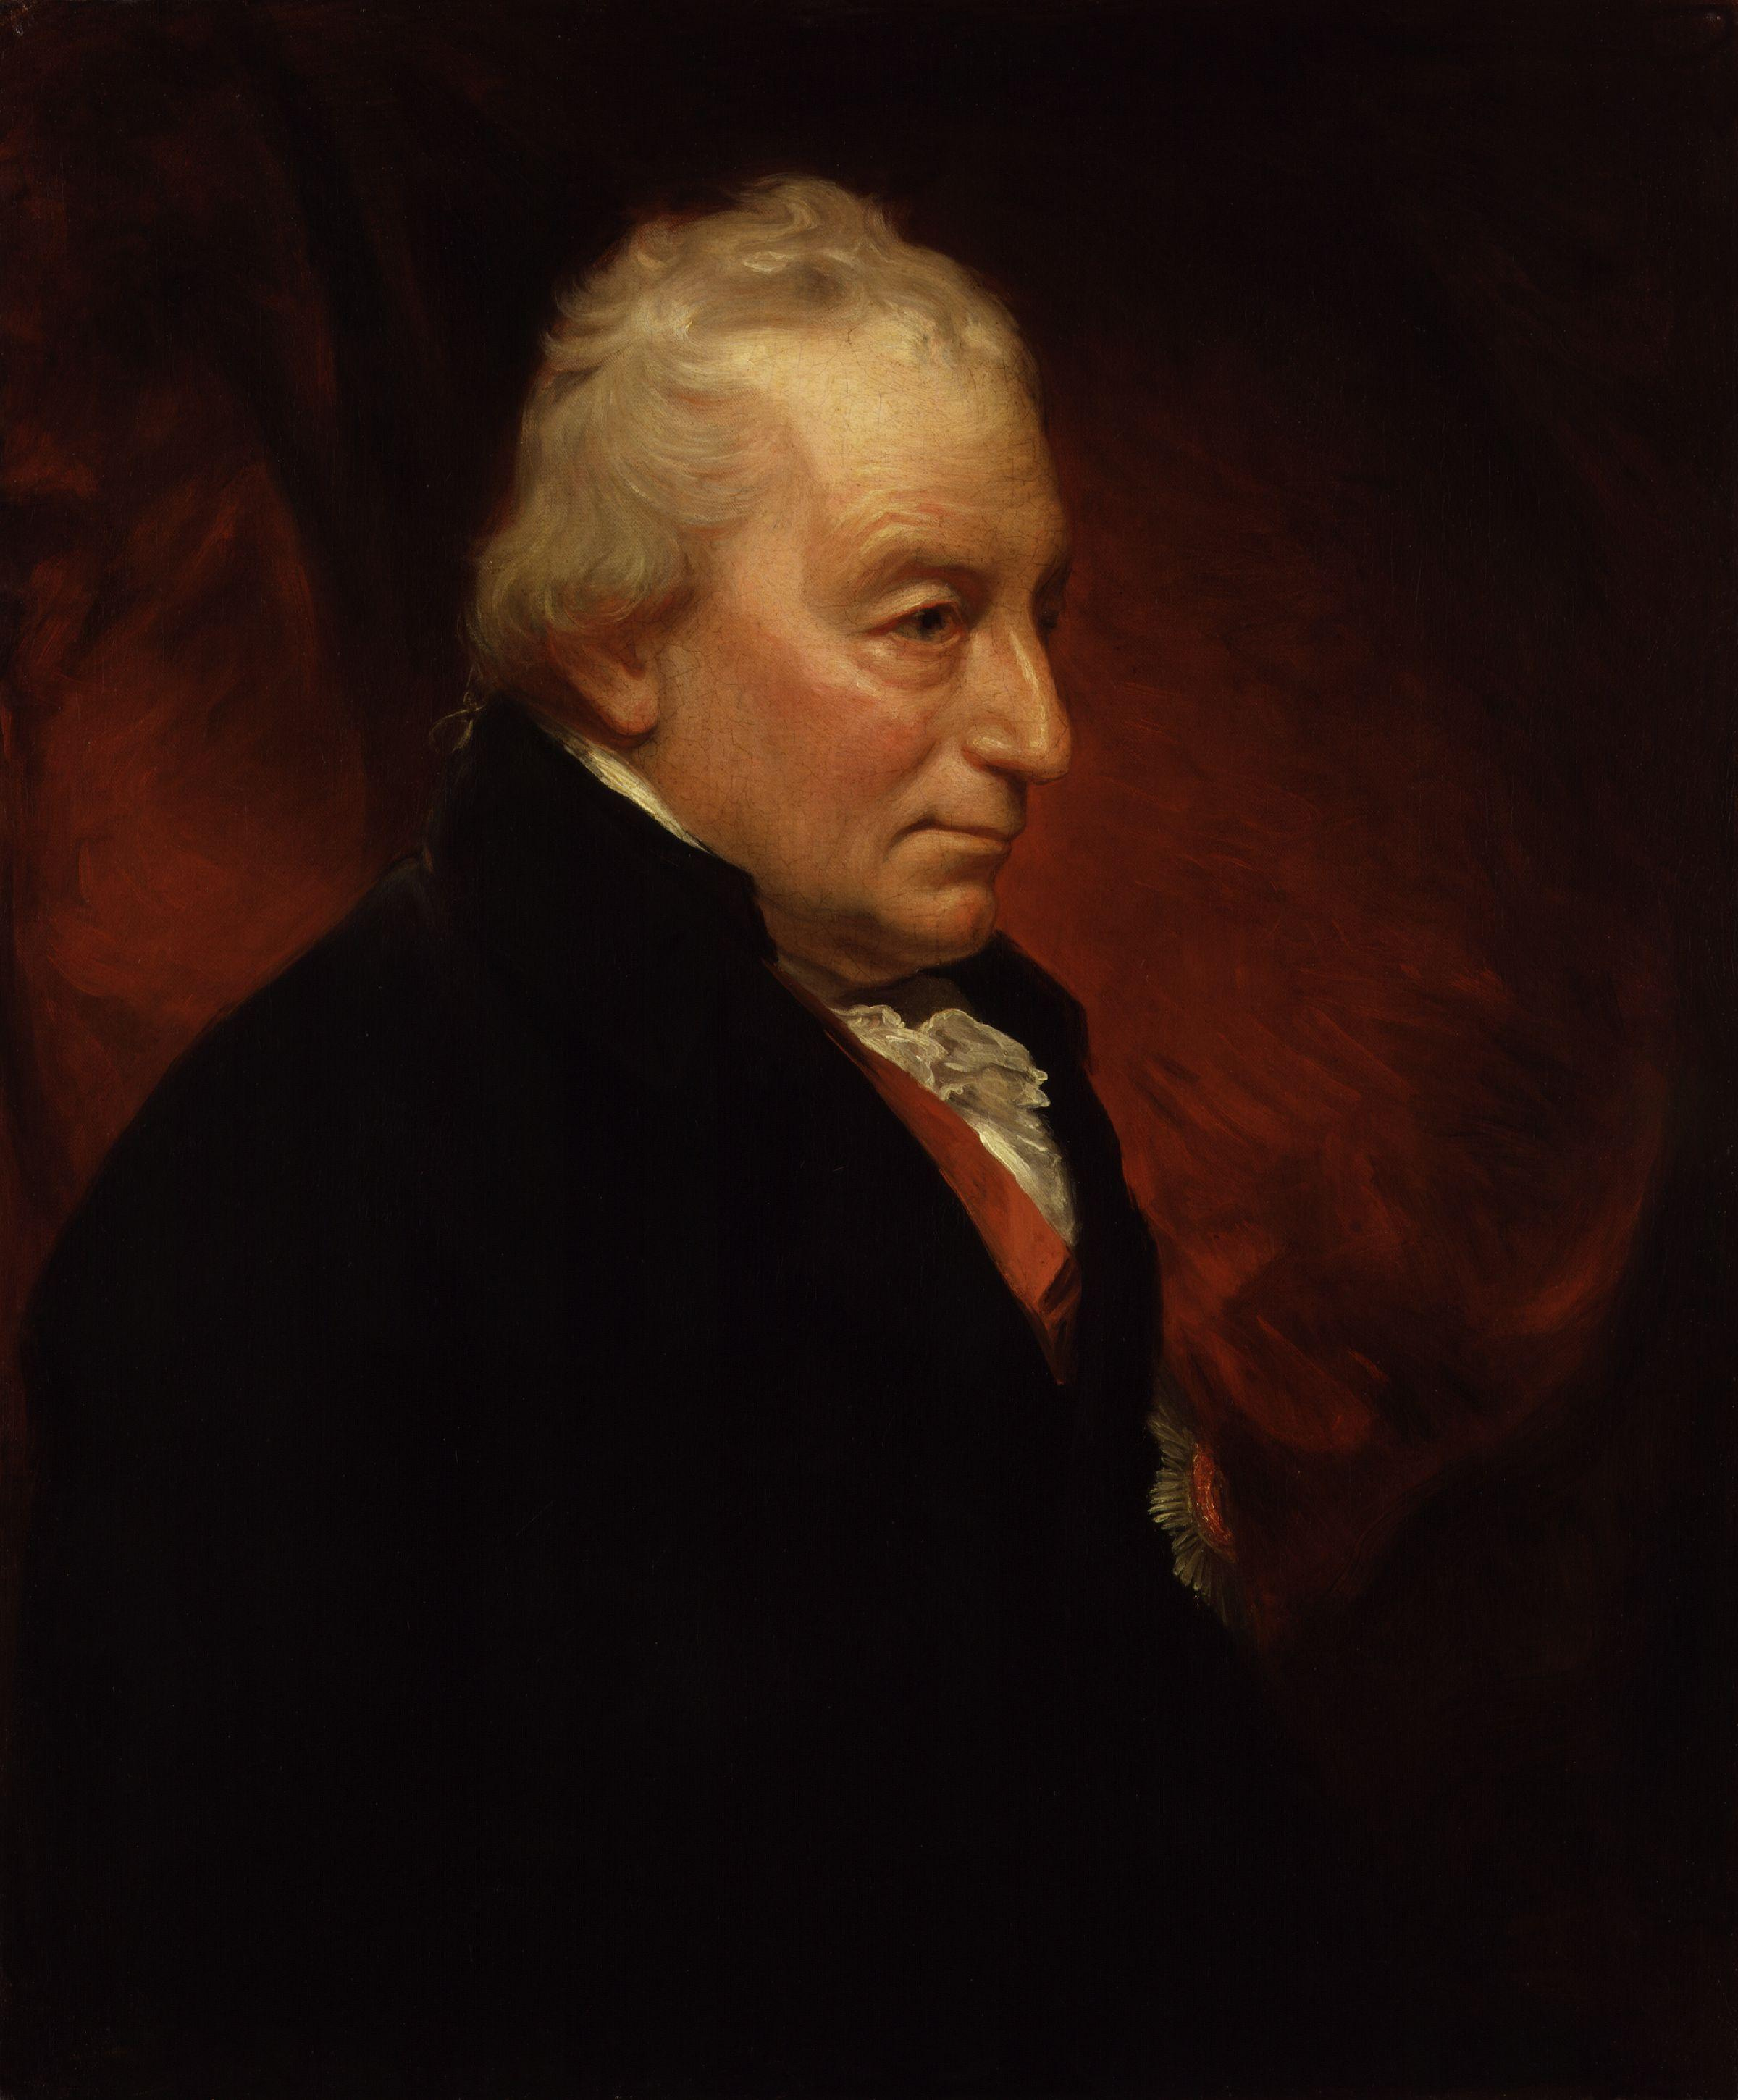 John Jervis, Earl of St Vincent by Sir William Beechey